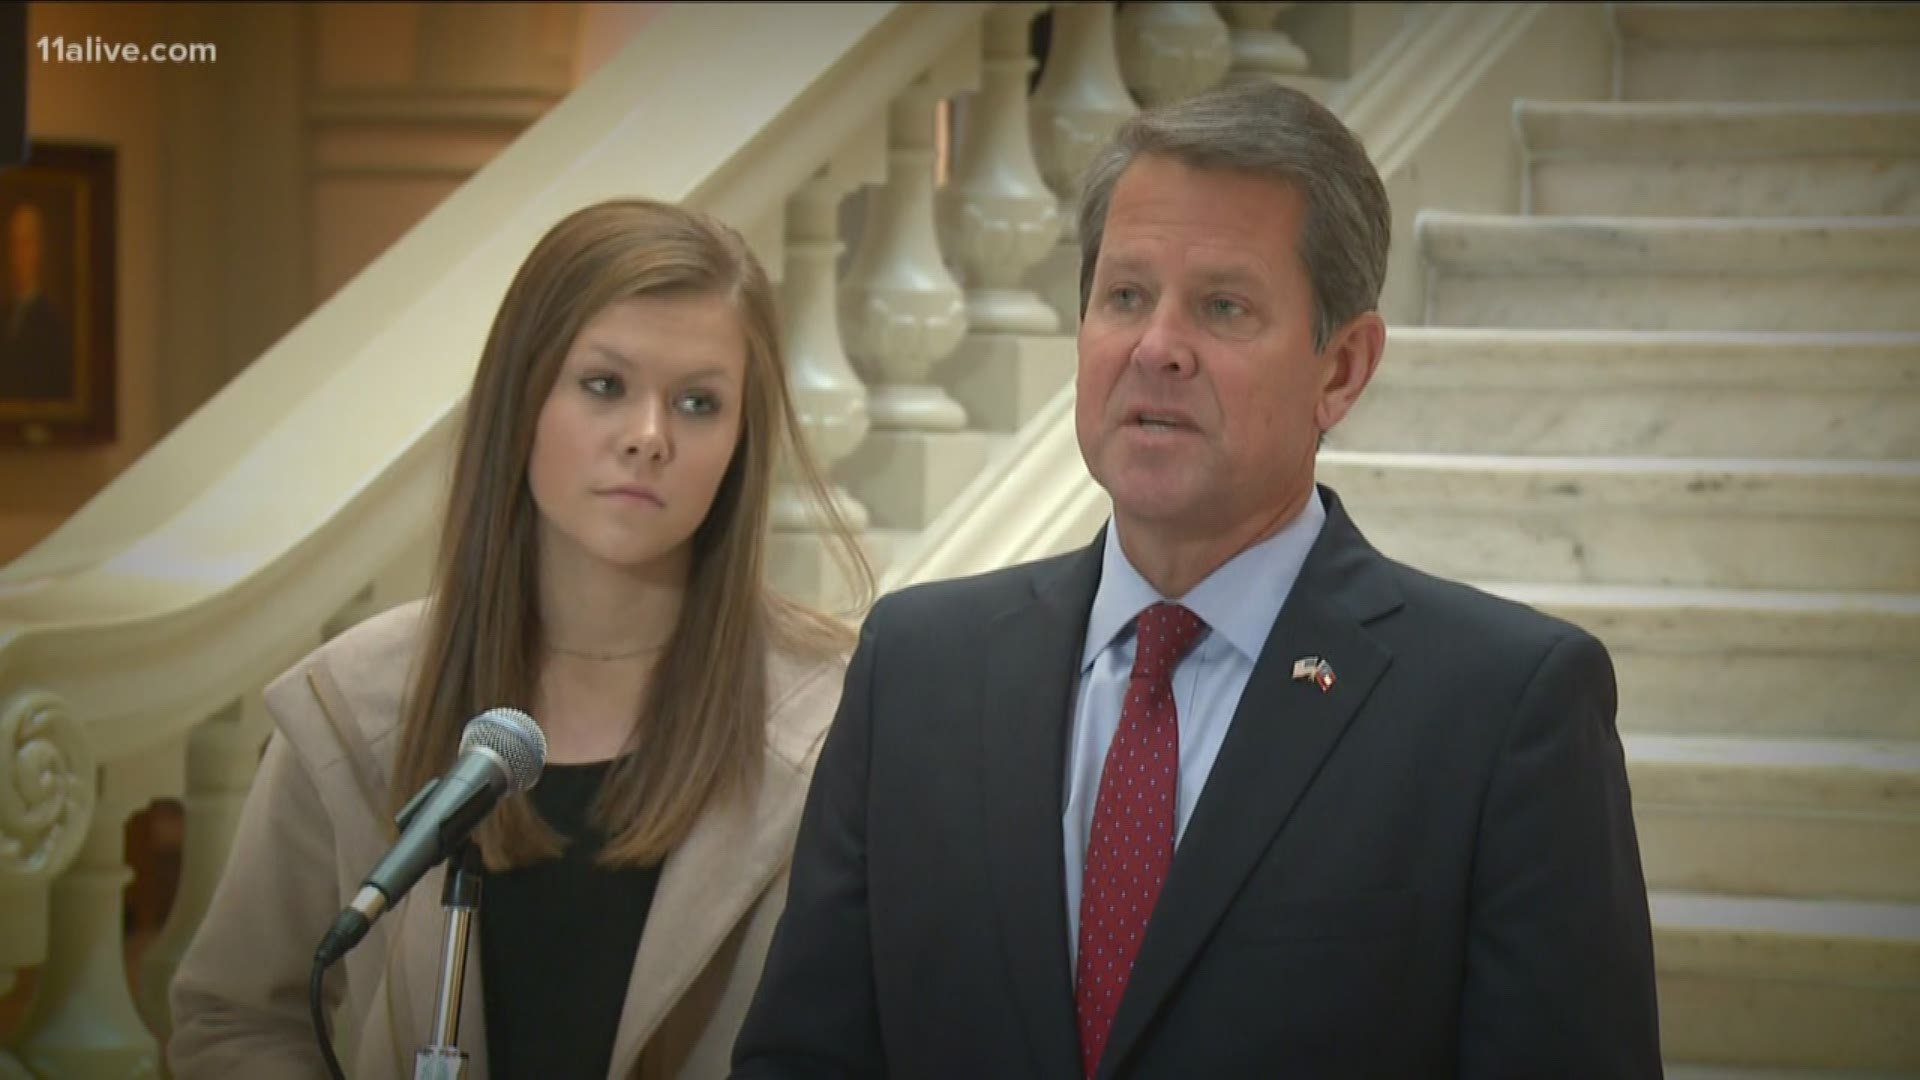 The official count is in and Brian Kemp is the winner, but his former opponent isn't done fighting what she believed led to an unfair process.